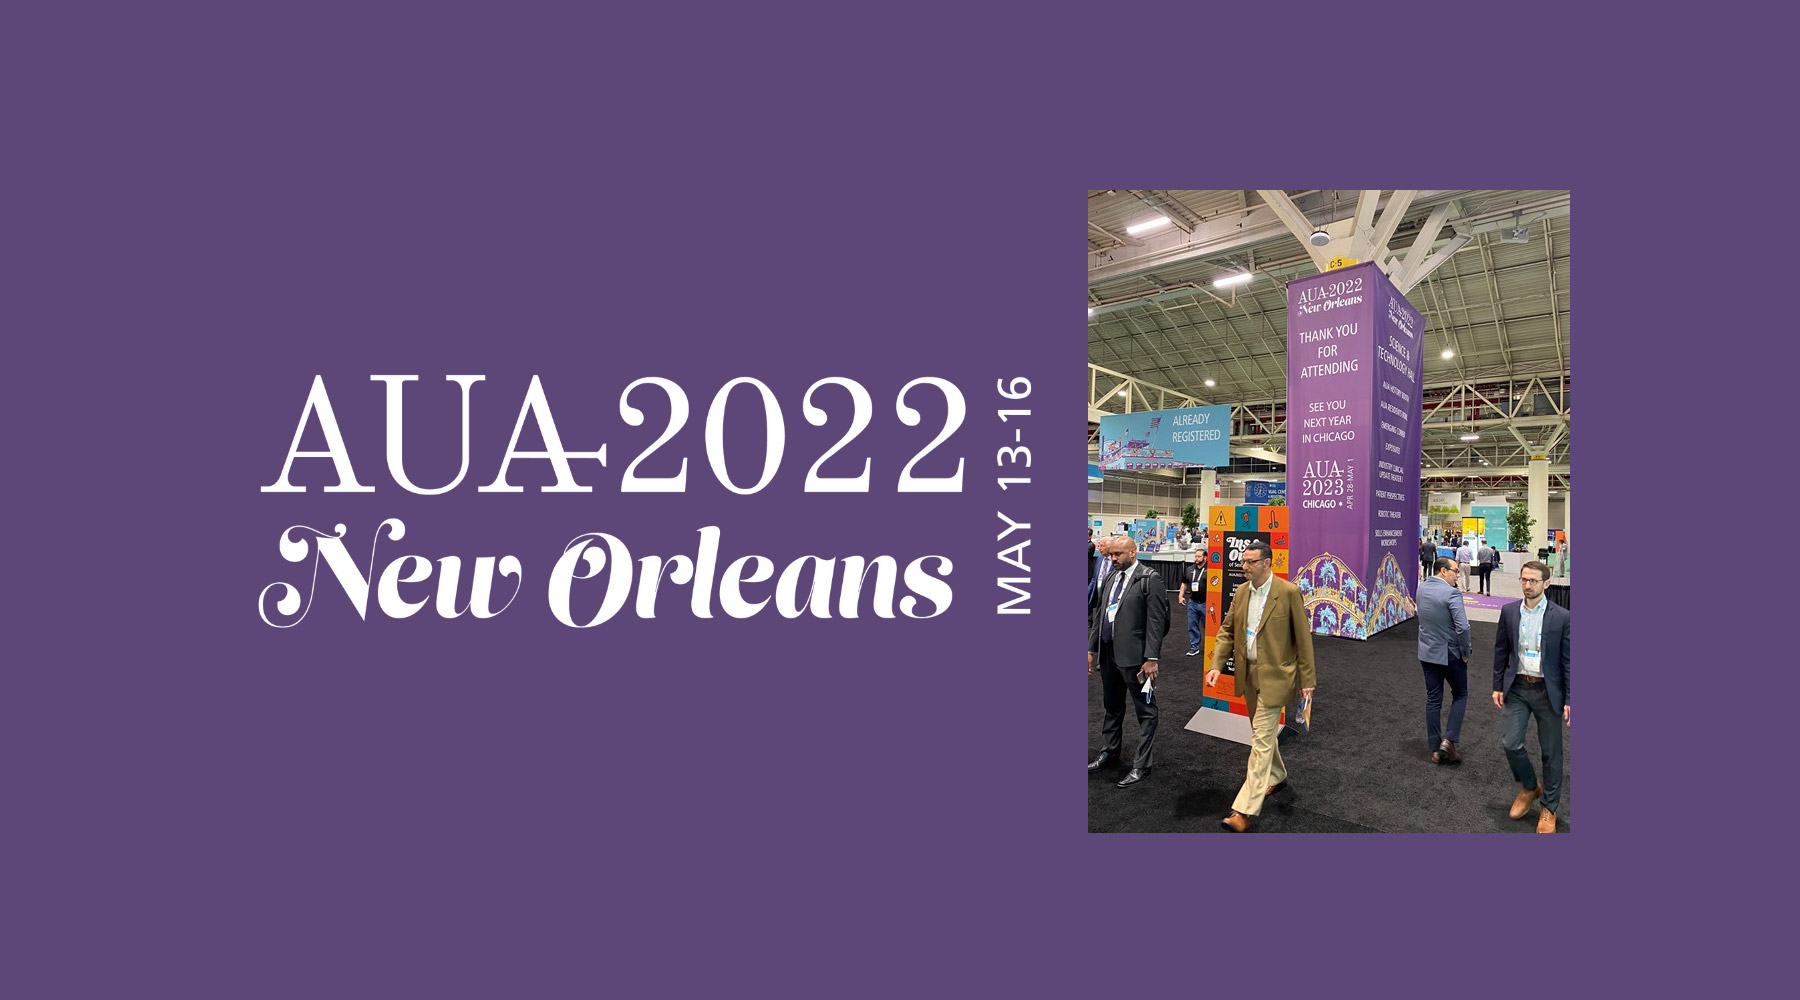 5 Things Urologists Were Talking About at AUA 2022